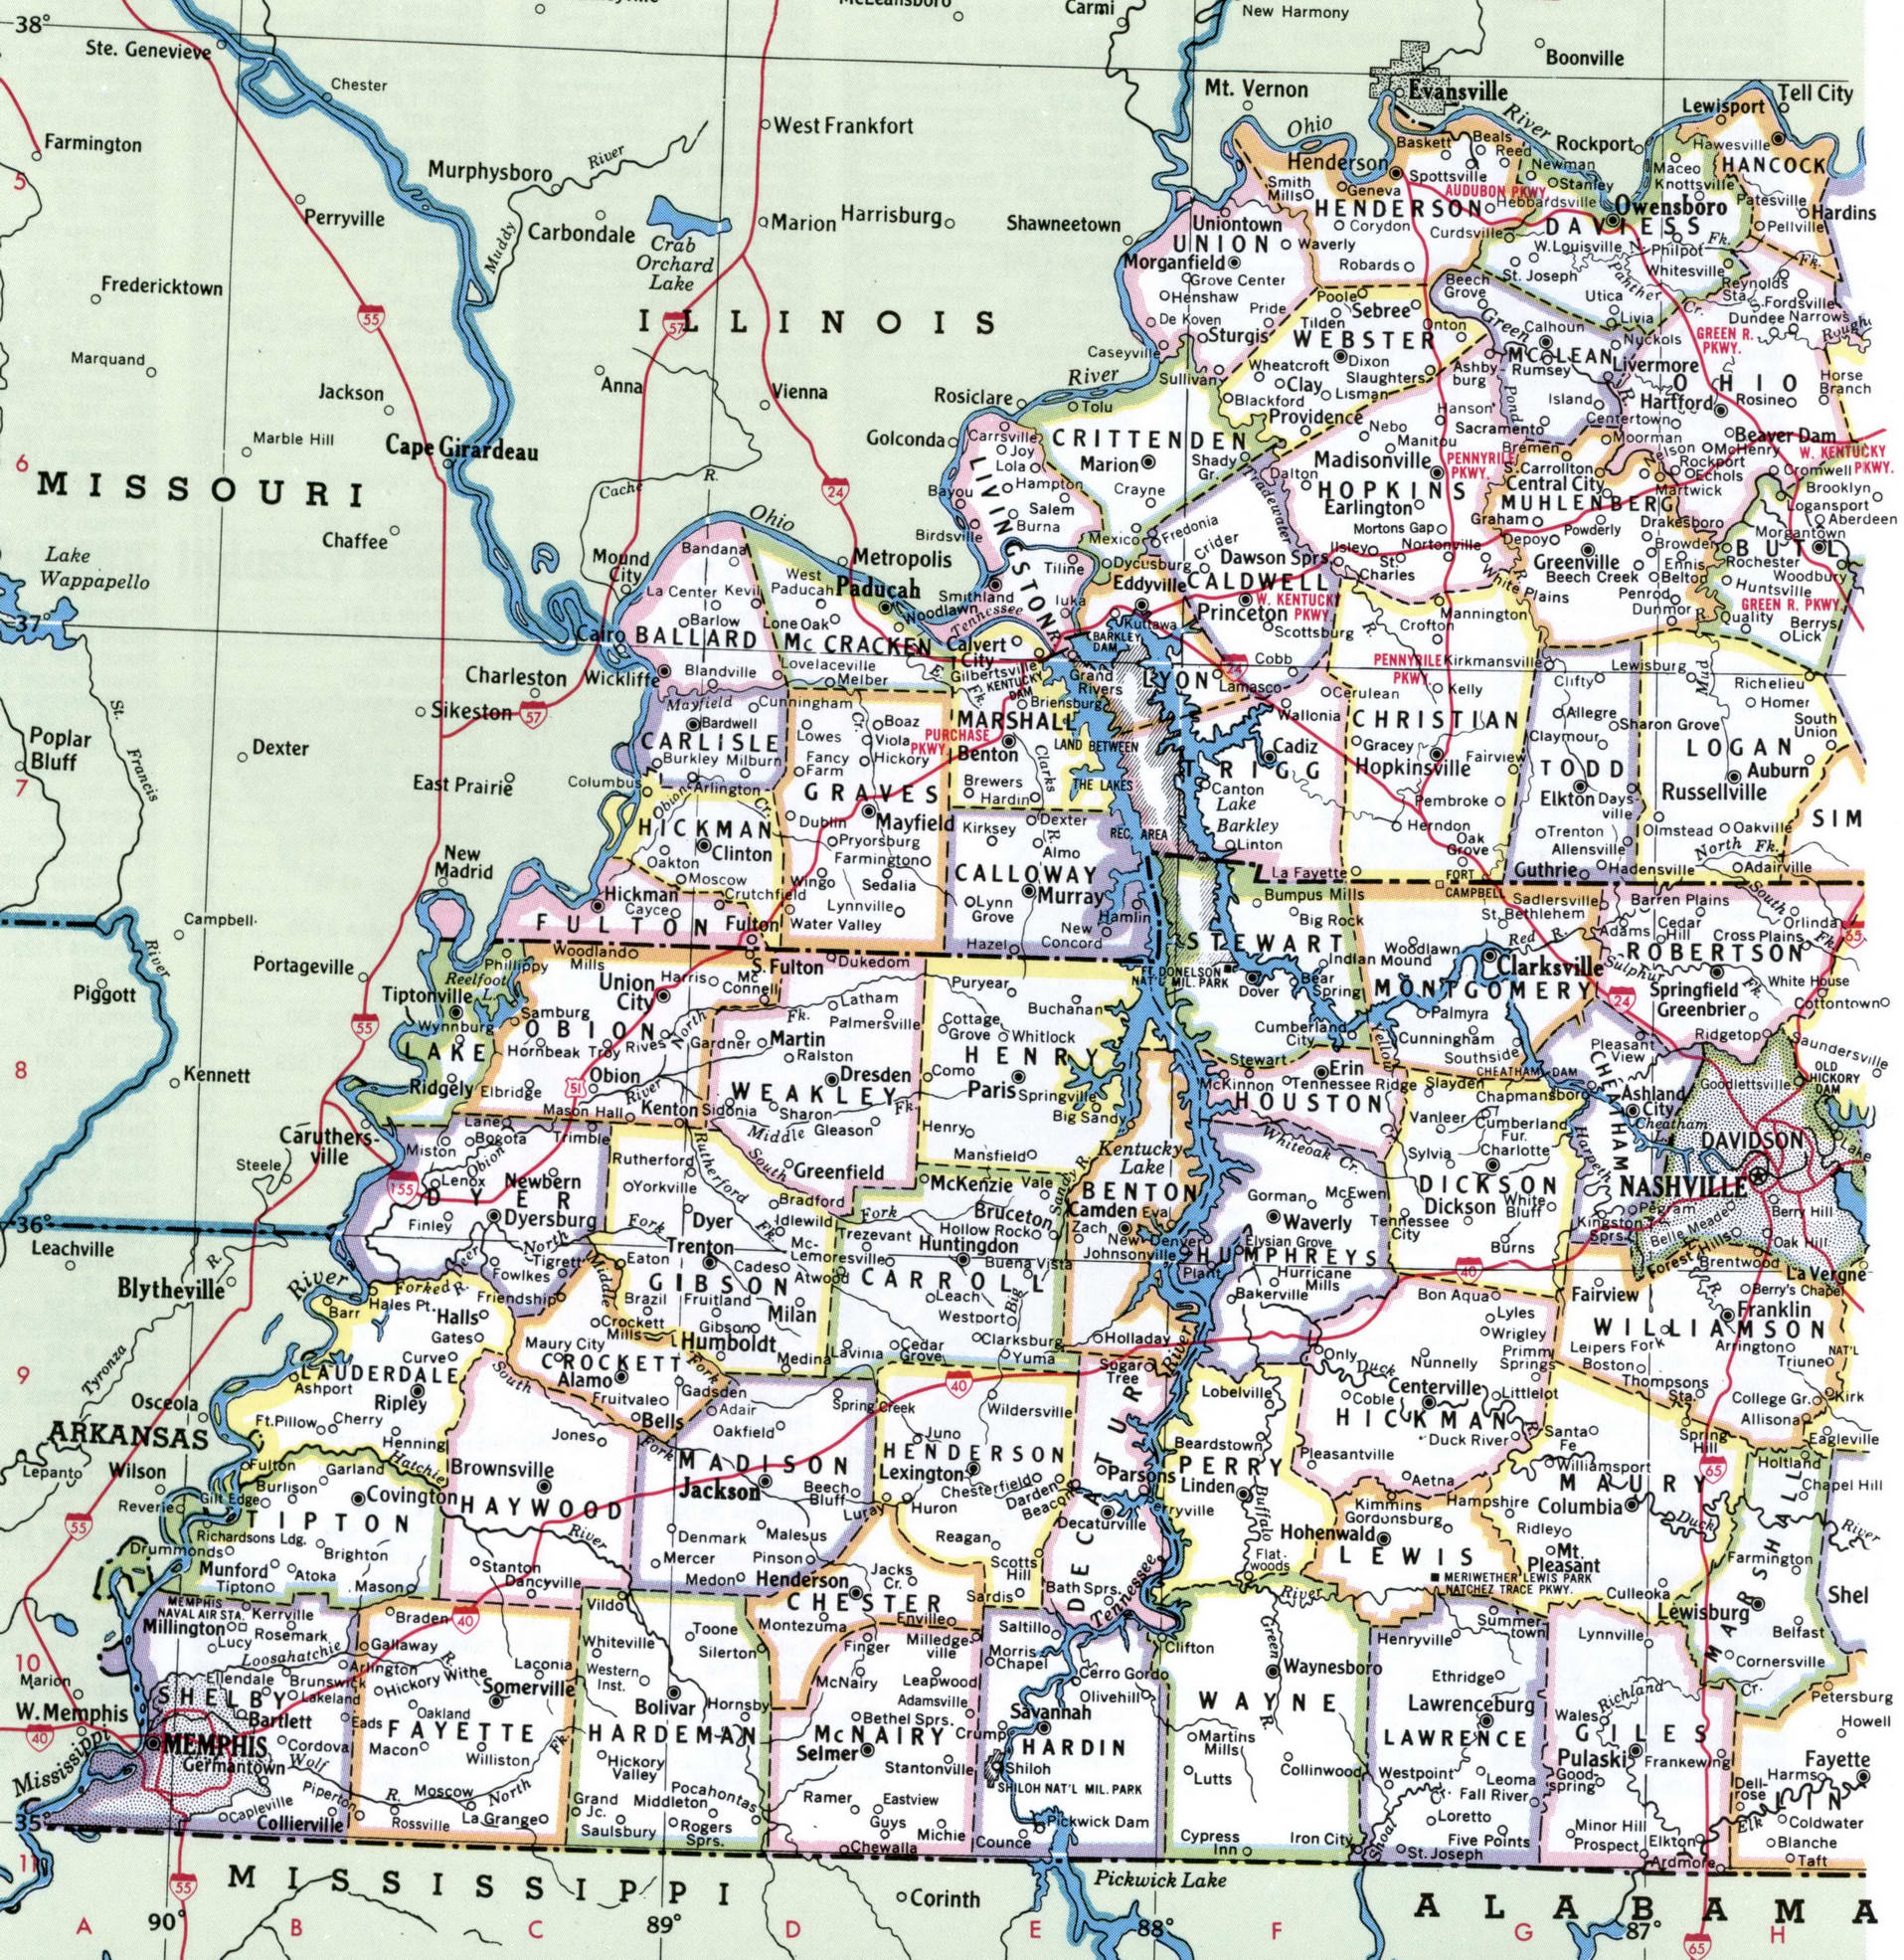 Kentucky map with counties